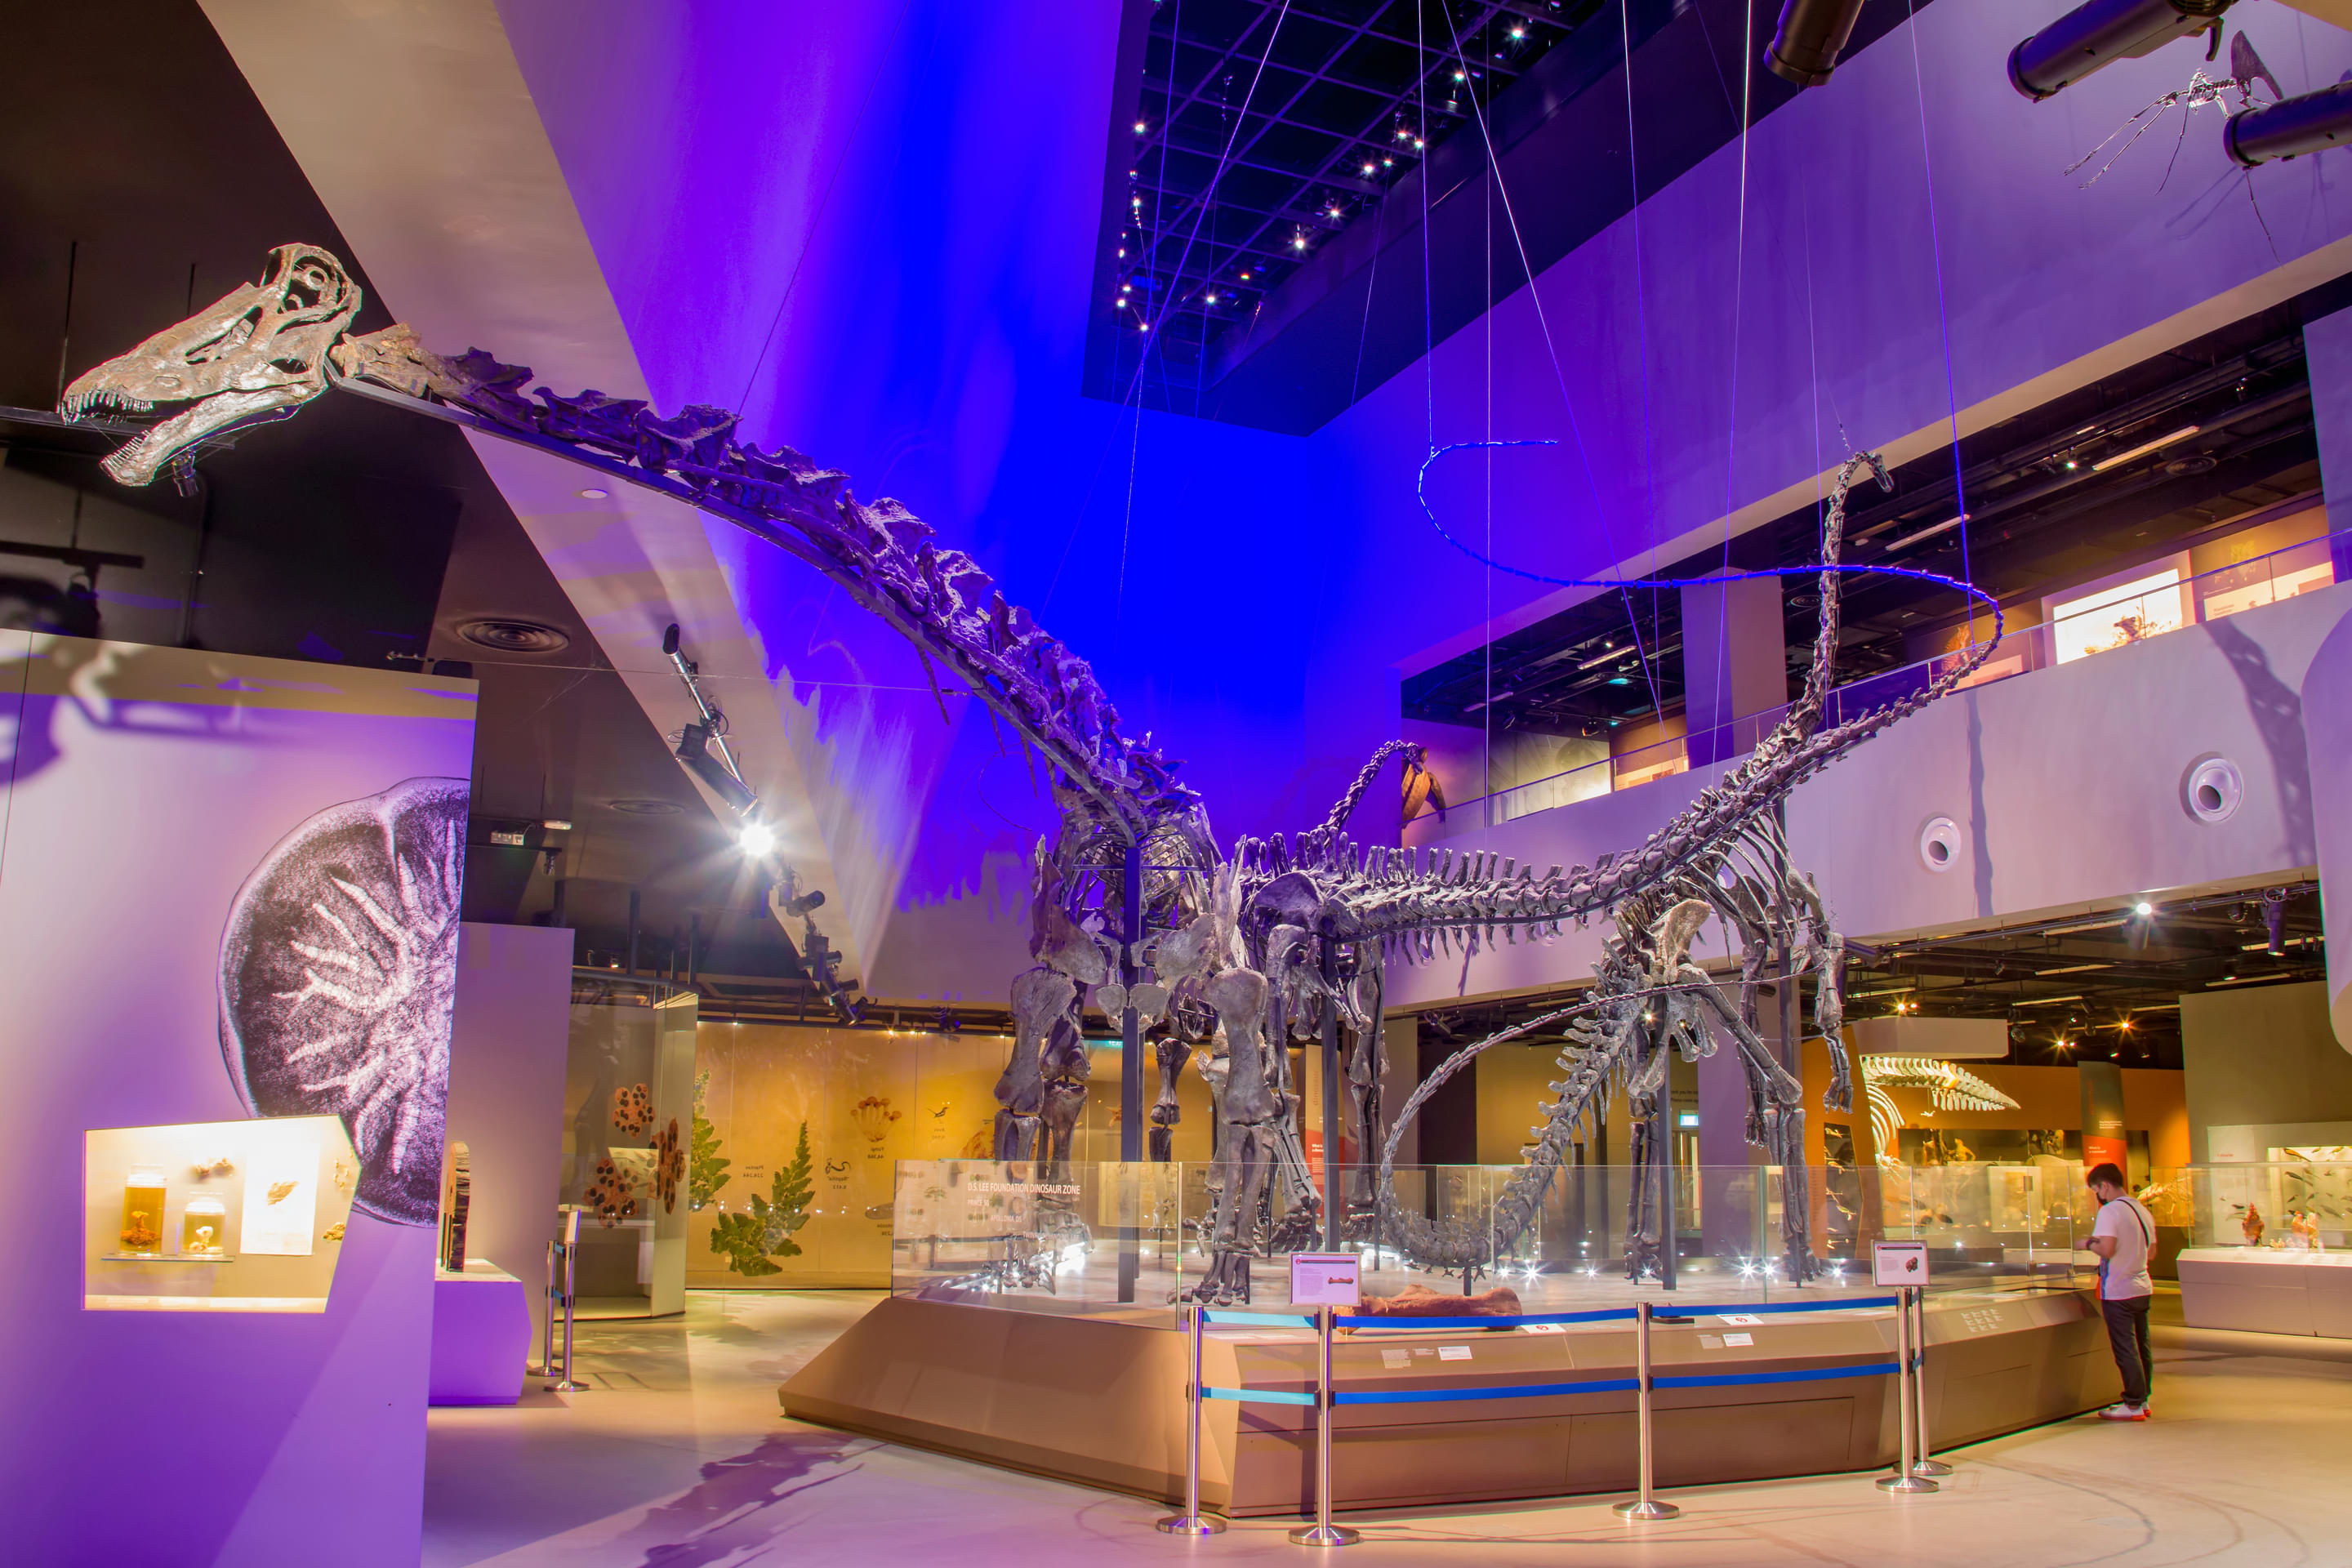 Lee Kong Chian Natural History Museum Overview